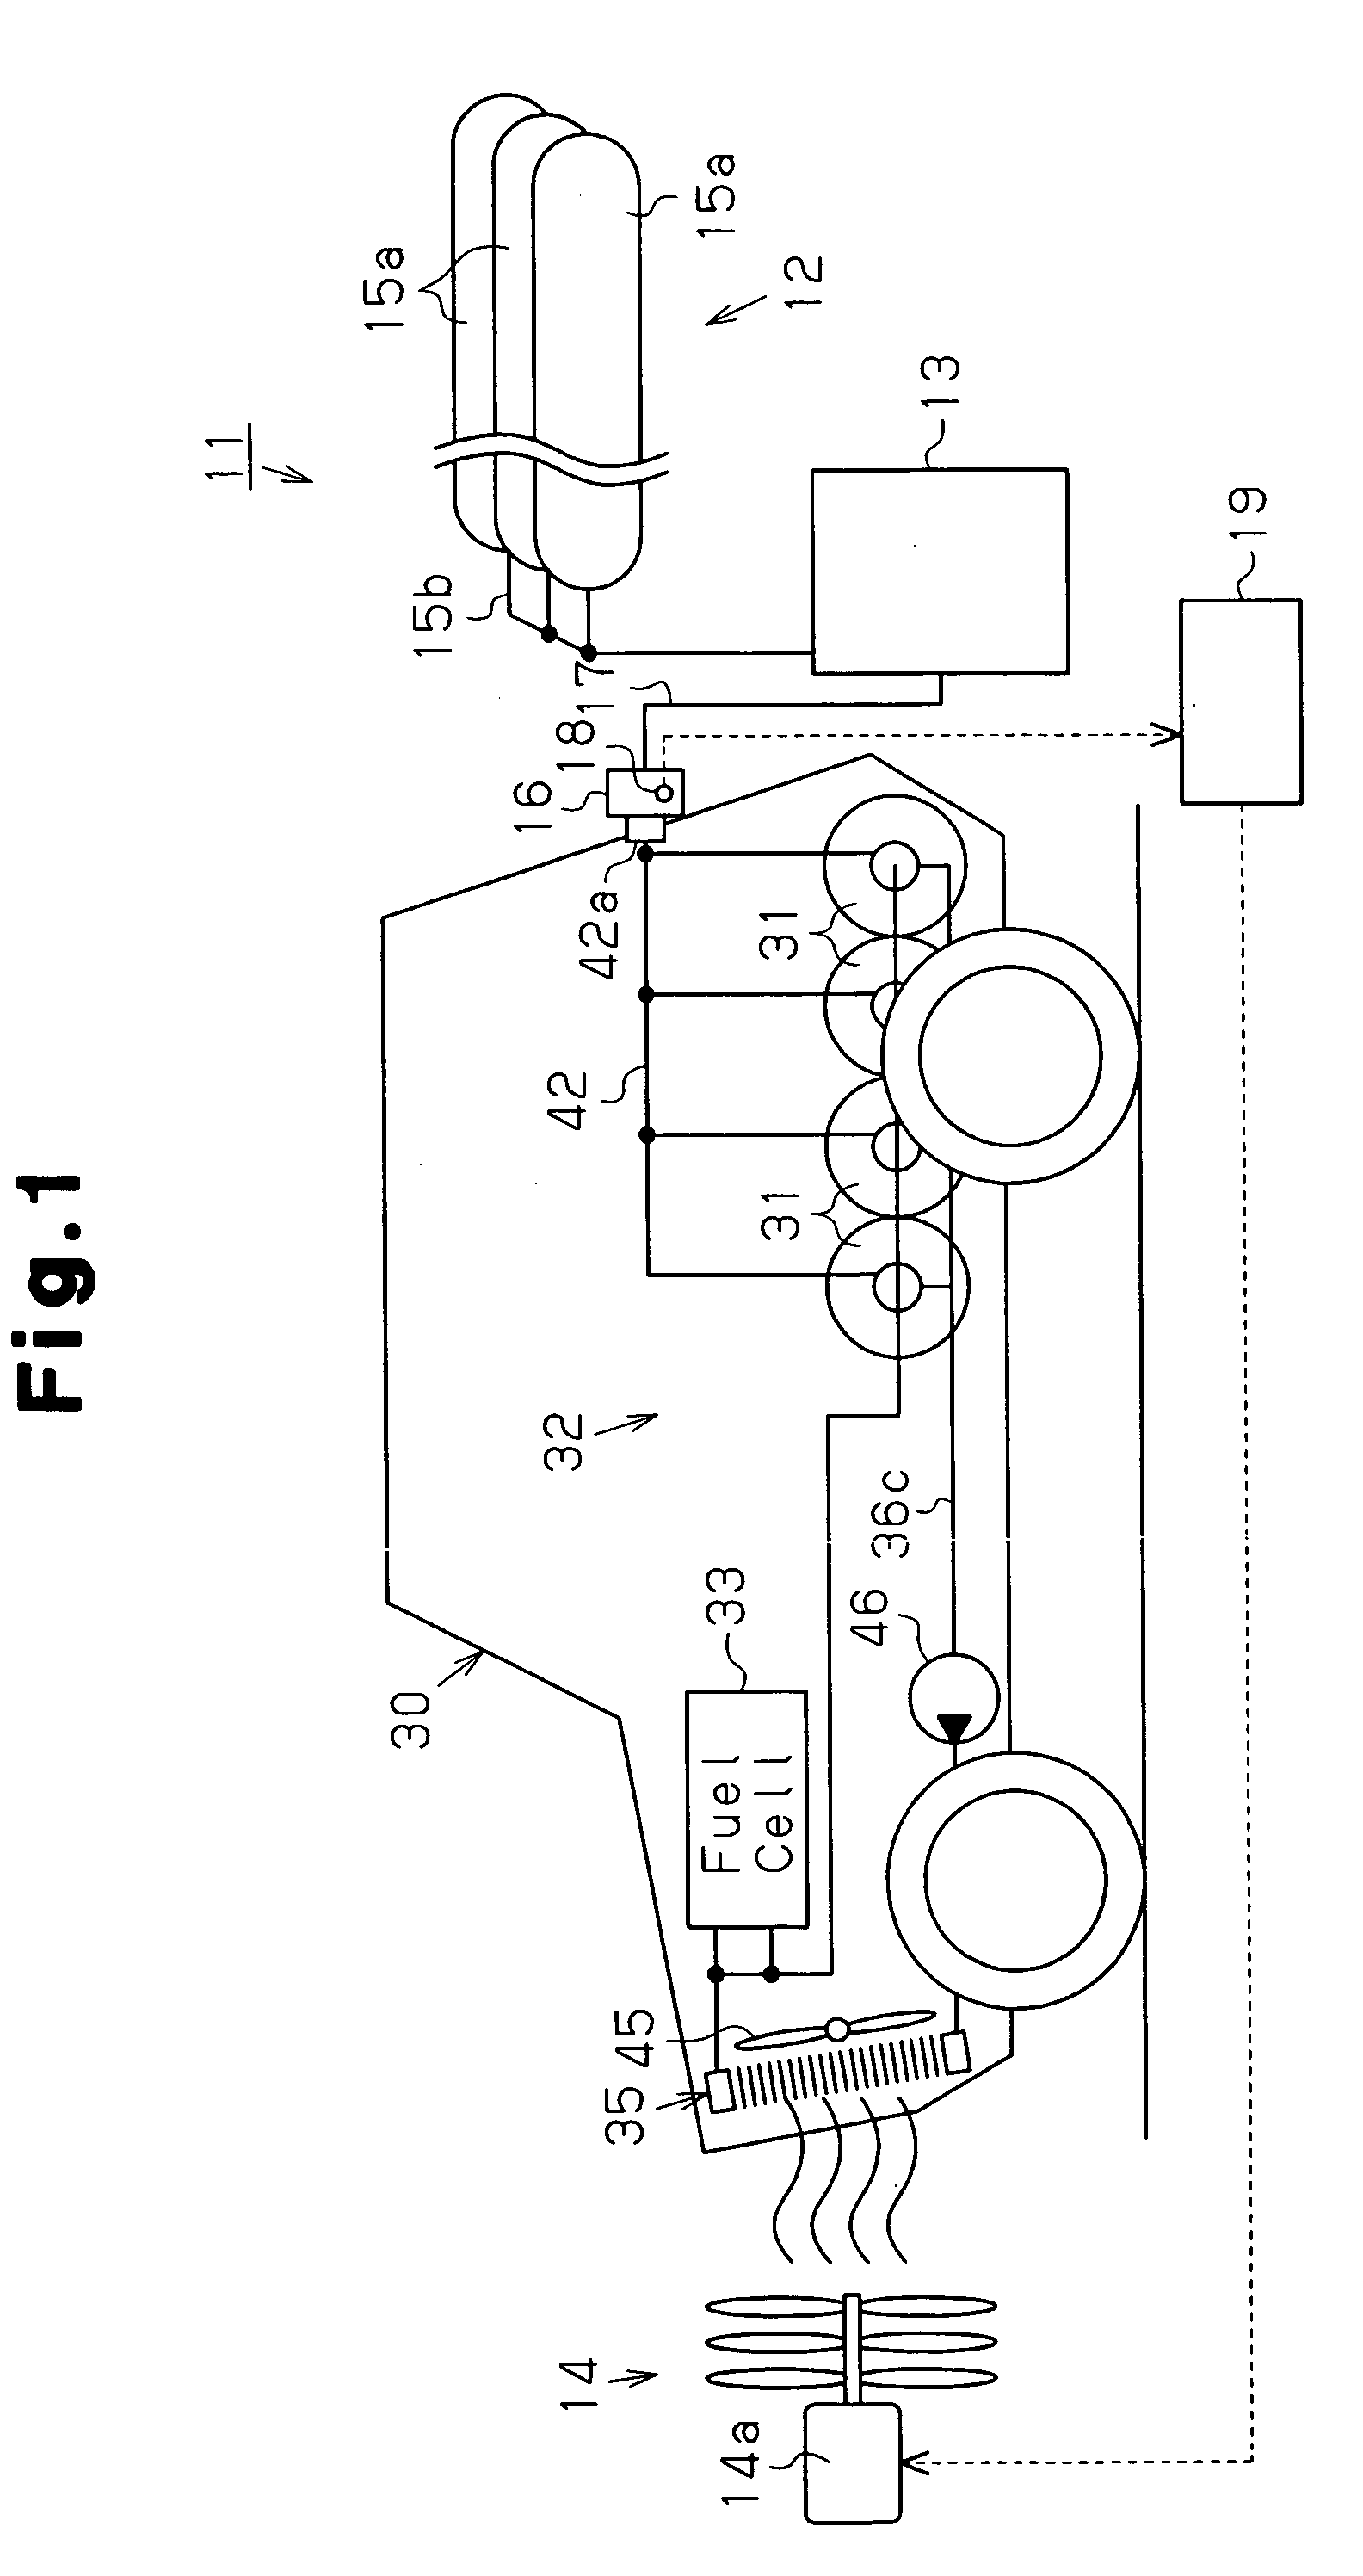 Hydrogen station, method of charging hydrogen, and vehicle